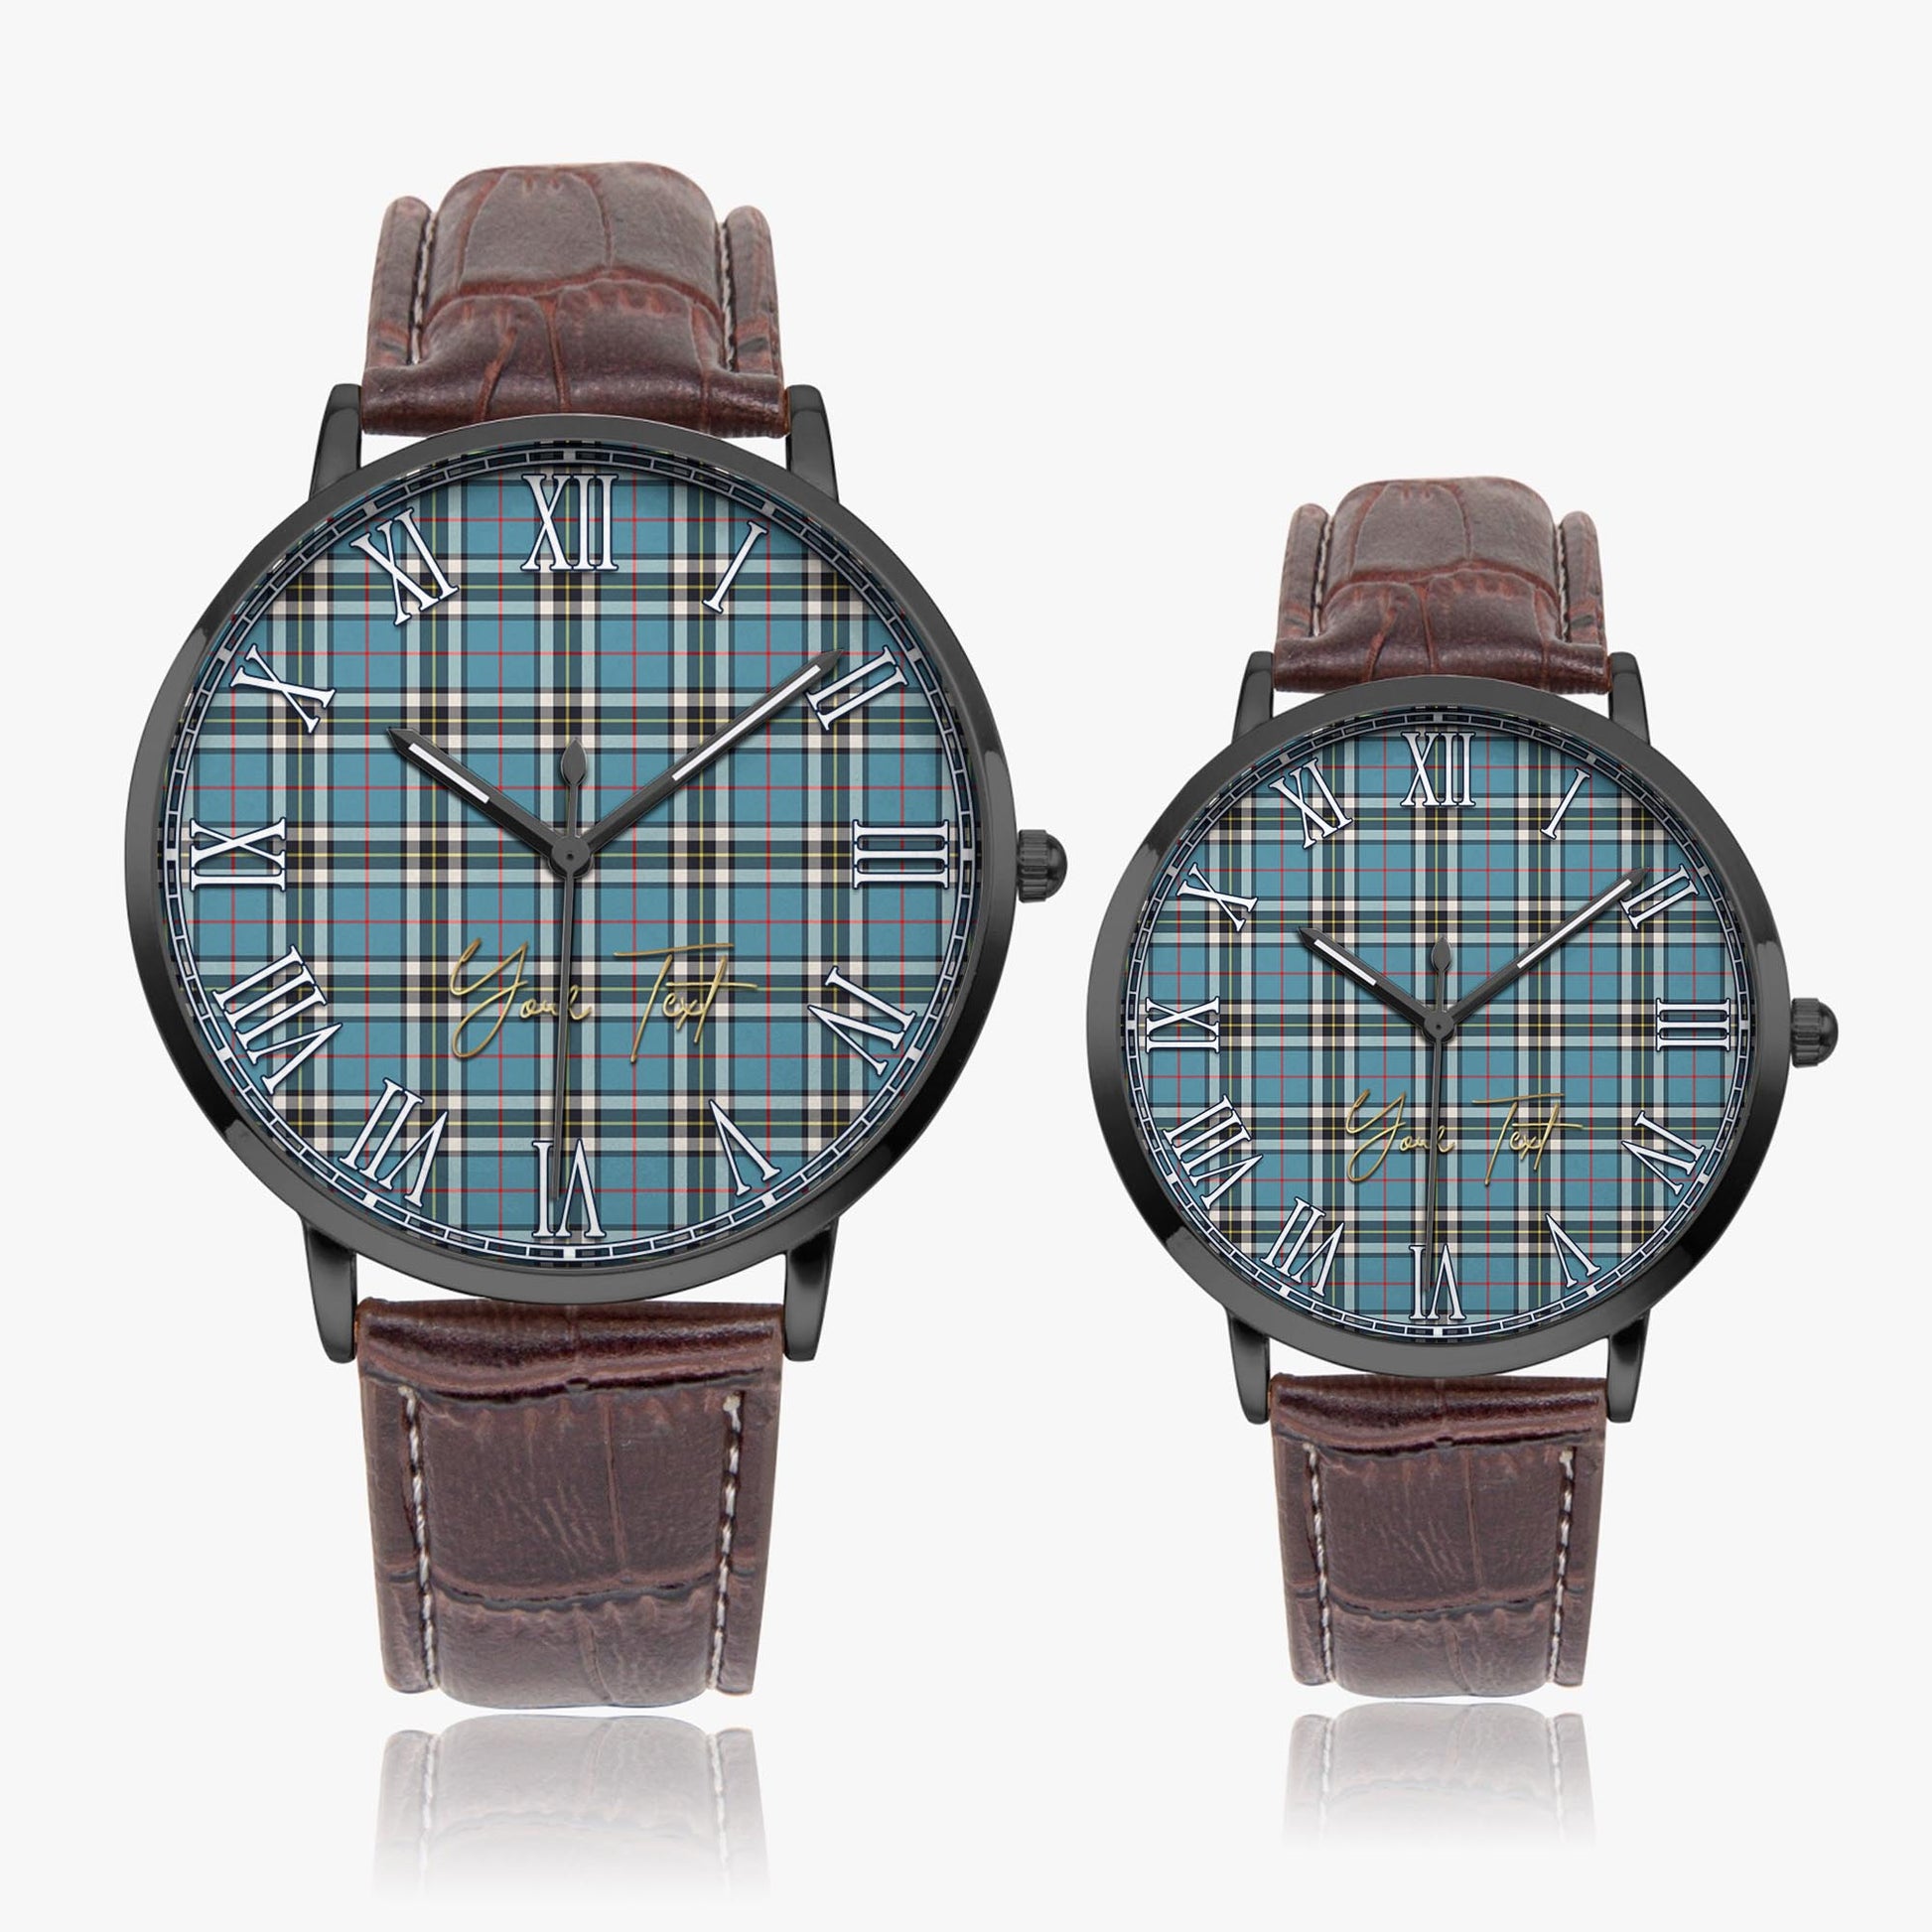 Thomson Tartan Personalized Your Text Leather Trap Quartz Watch Ultra Thin Black Case With Brown Leather Strap - Tartanvibesclothing Shop